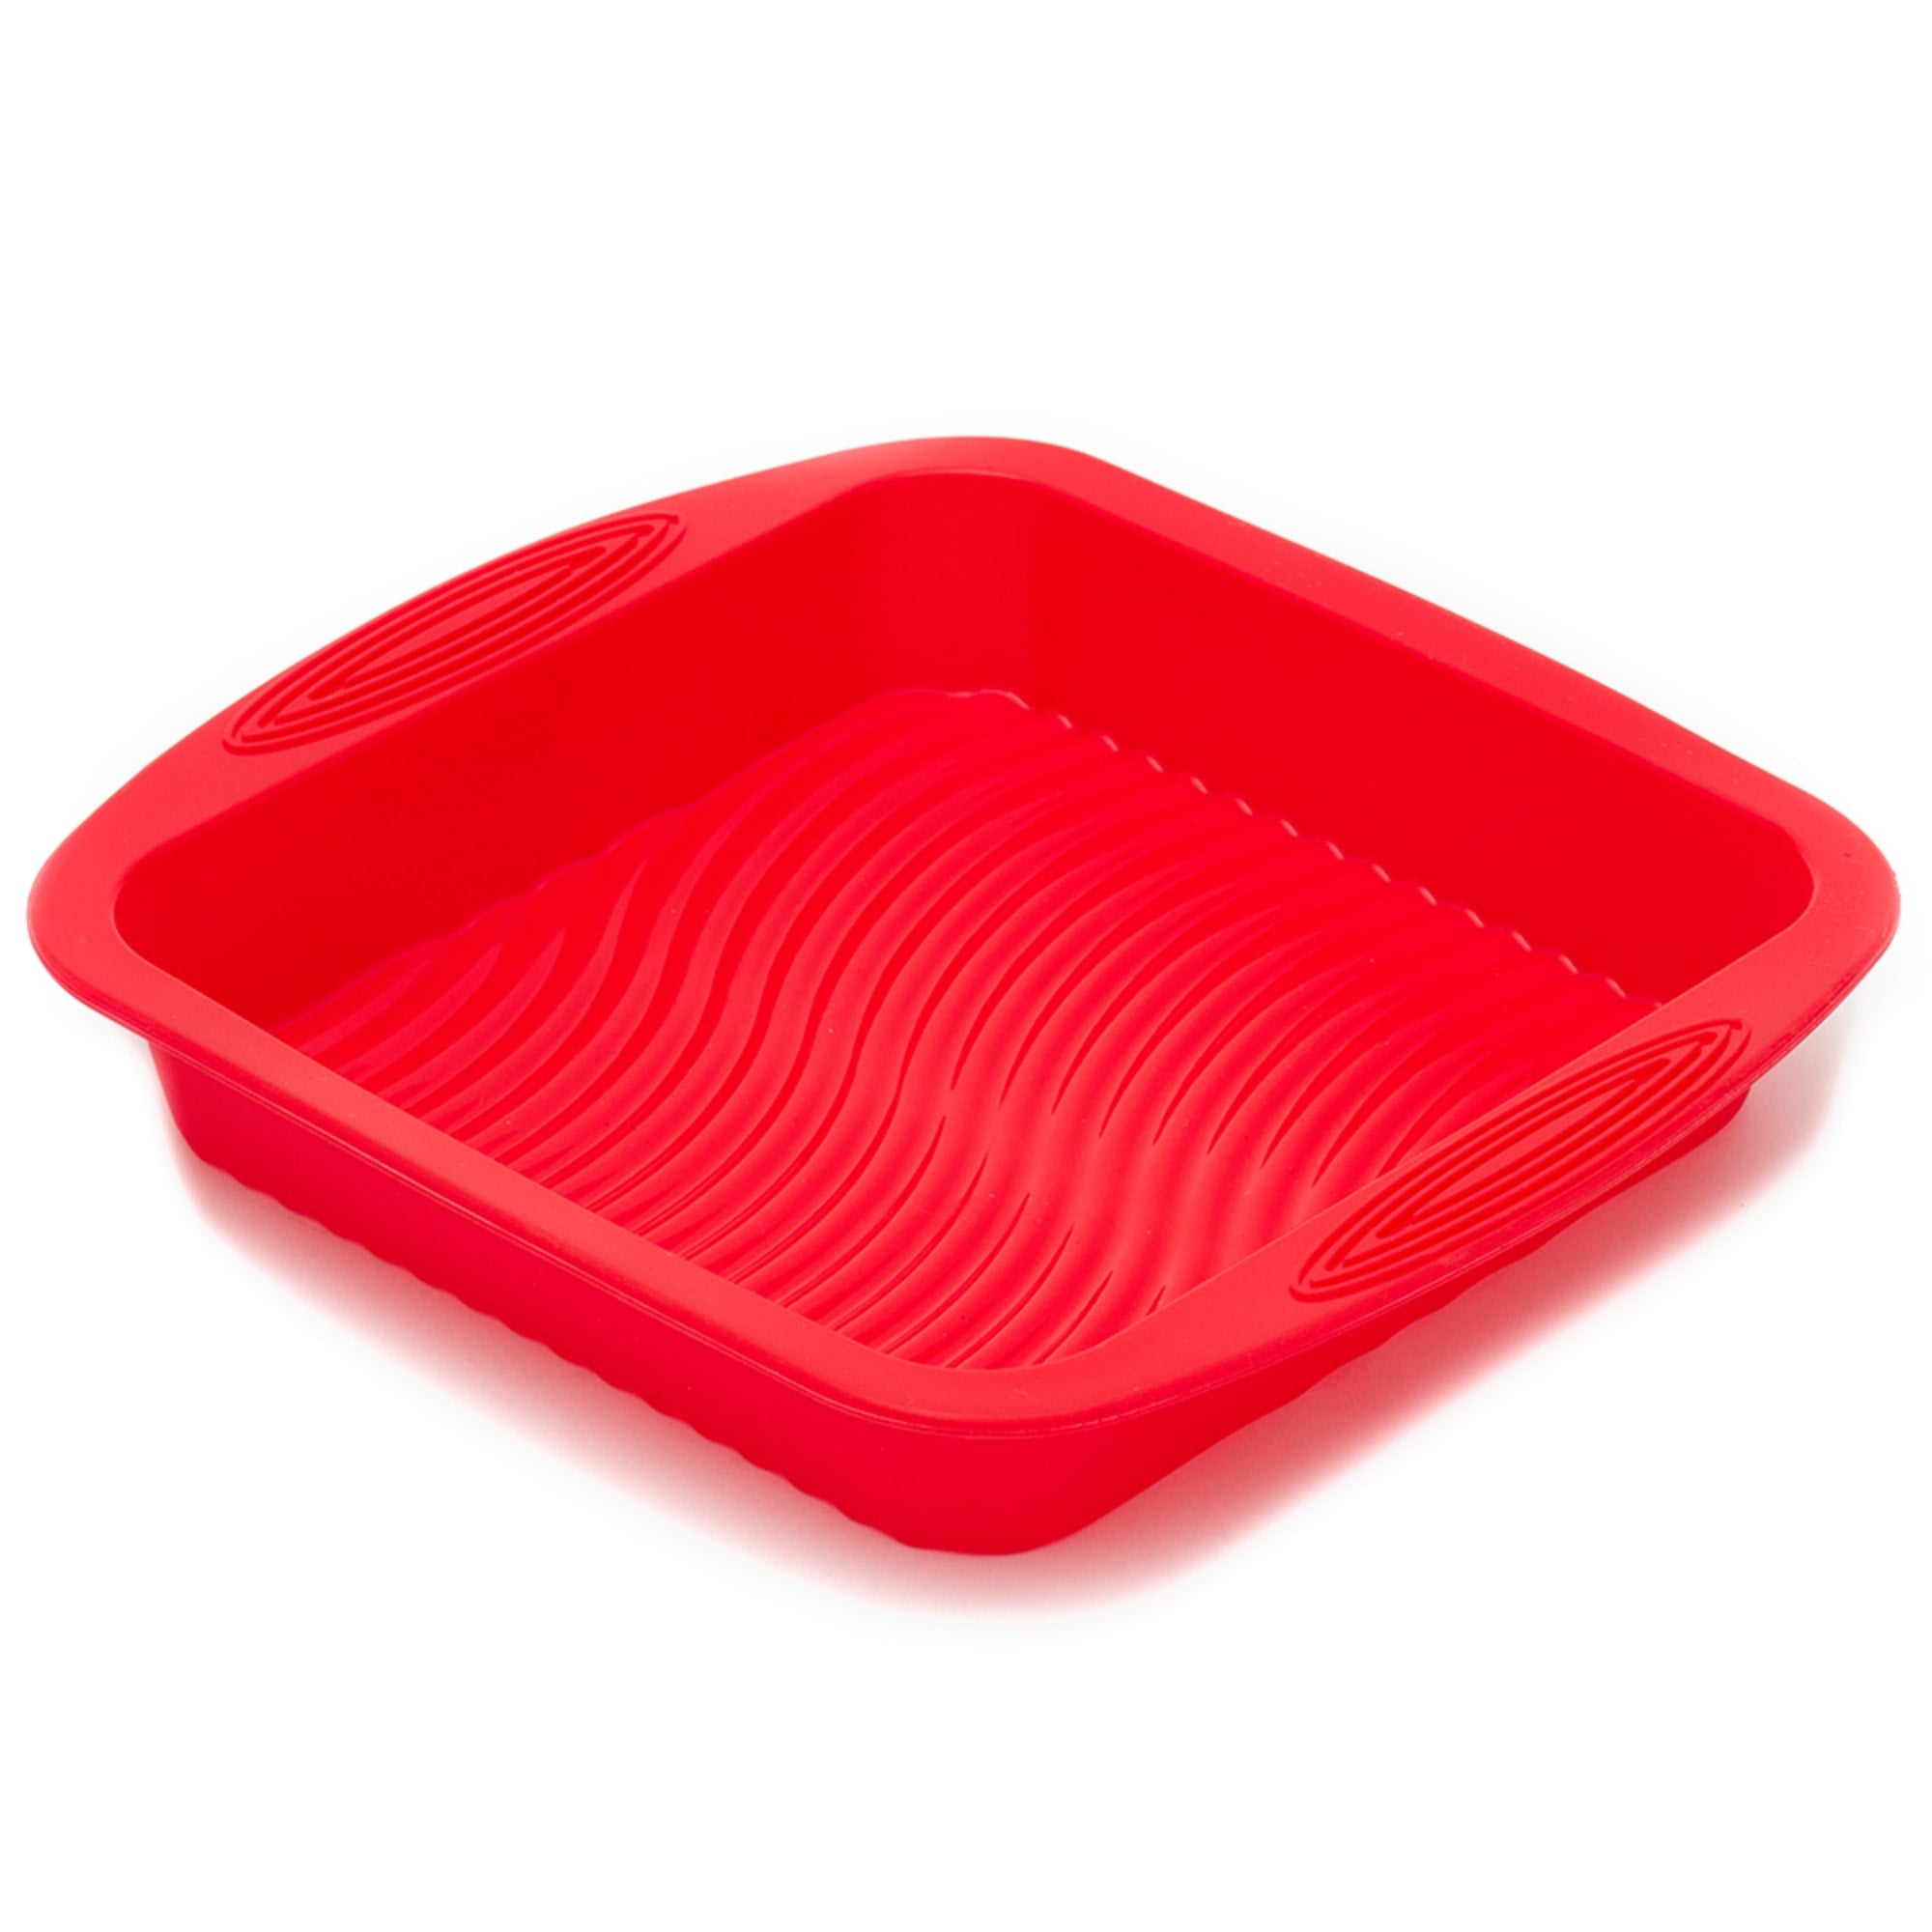 Home Basics Square Silicone Baking Pan $5.00 EACH, CASE PACK OF 24